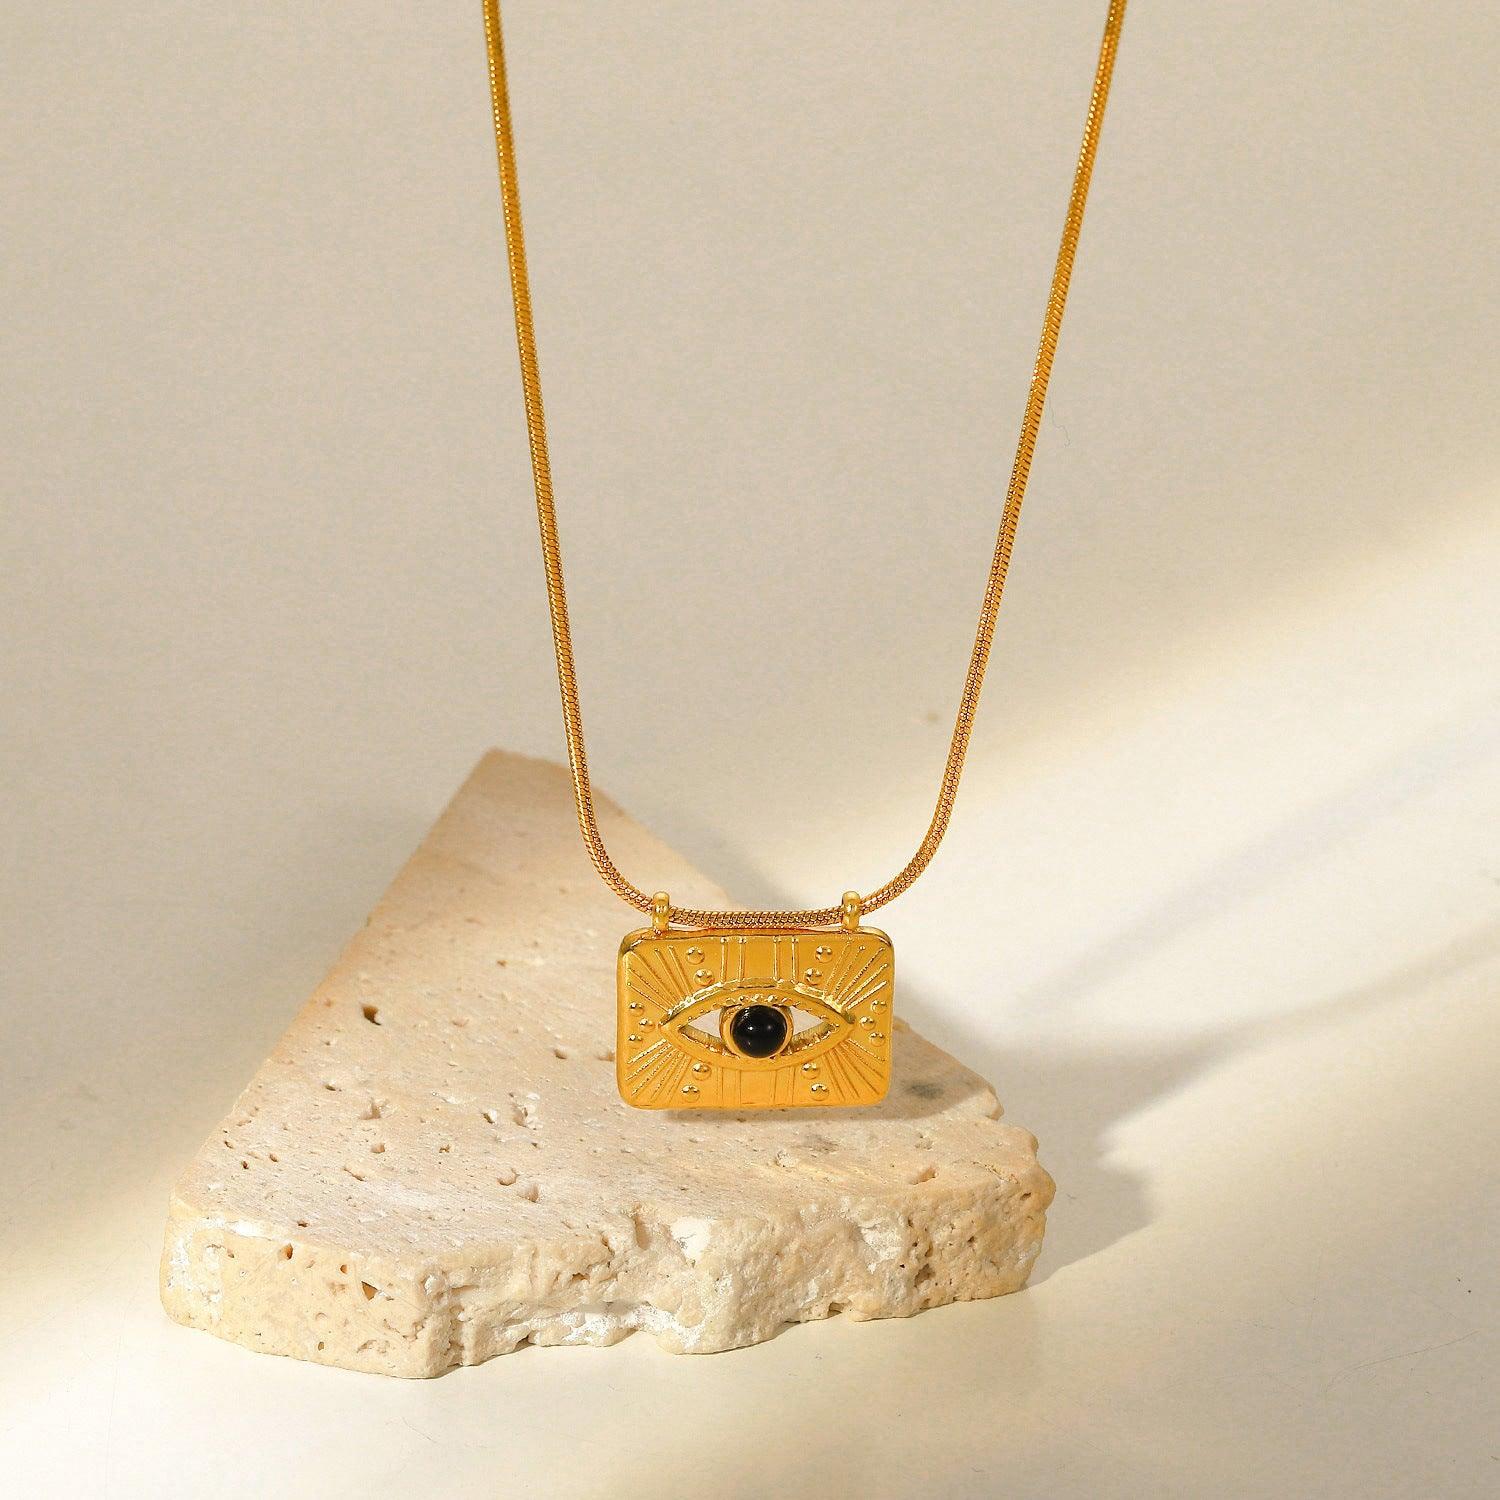 N31.French retro square eye pendant necklace - Elle Royal Jewelry